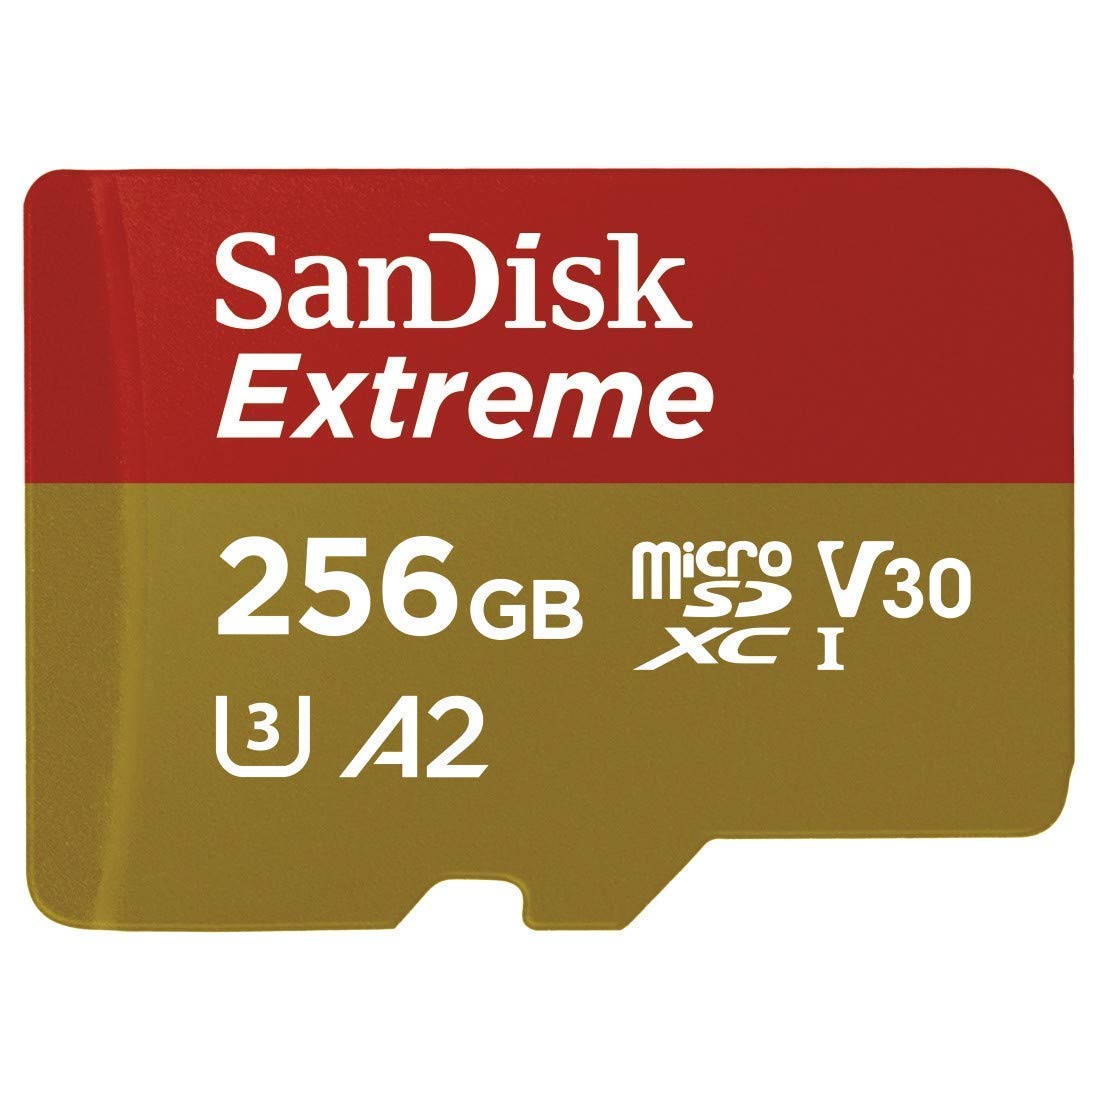 SanDisk Extreme V30 A2 (Bulk 2 Pack) 256GB Micro SD Card for DJI FPV Drone (SDSQXA1-256G-GN6MN) UHS-I U3 Class 10 4K SDXC Bundle with (1) Everything But Stromboli MicroSDXC Memory Card Reader